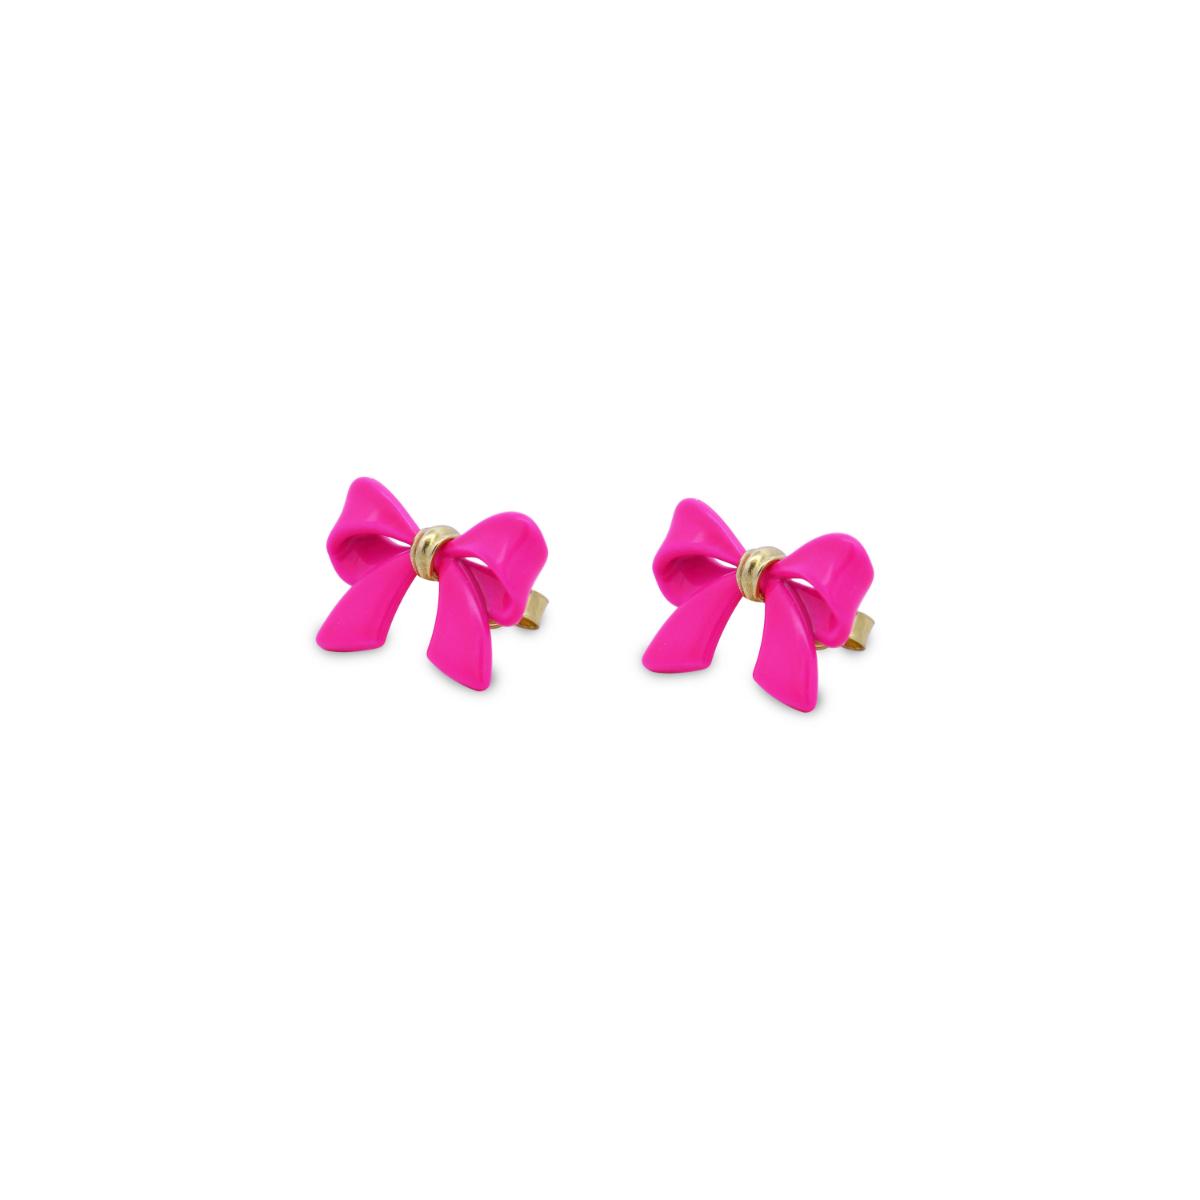 Pair of earrings big bow neon pink - CANDY BOW